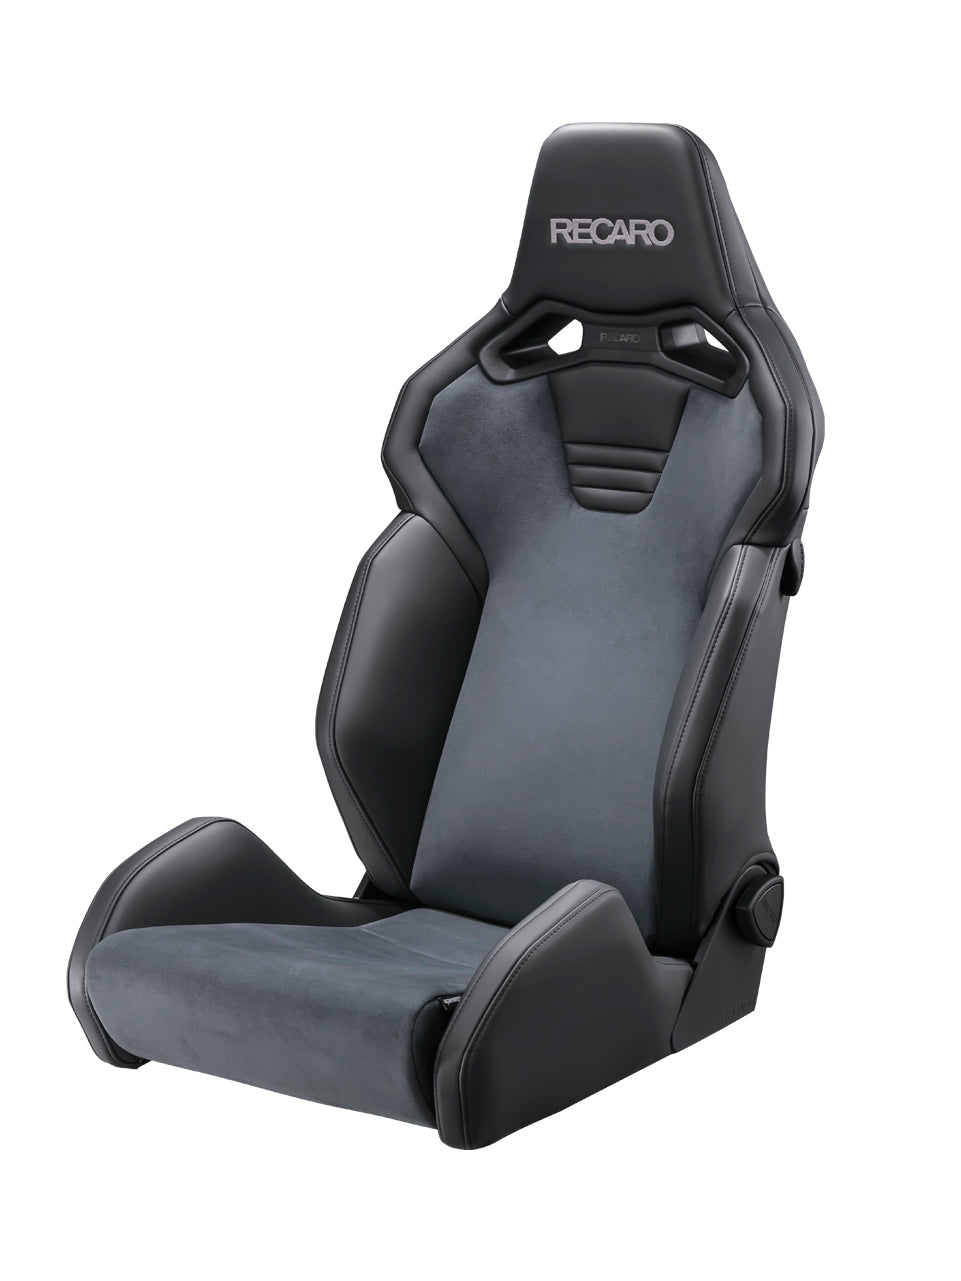 RECARO SR-S UT100 CG BK ULTRA SUEDE CHARCOAL GRAY AND ARTIFICIAL LEATHER BLACK COLOR WITH HEATED SEATS 81-120.21.645-0